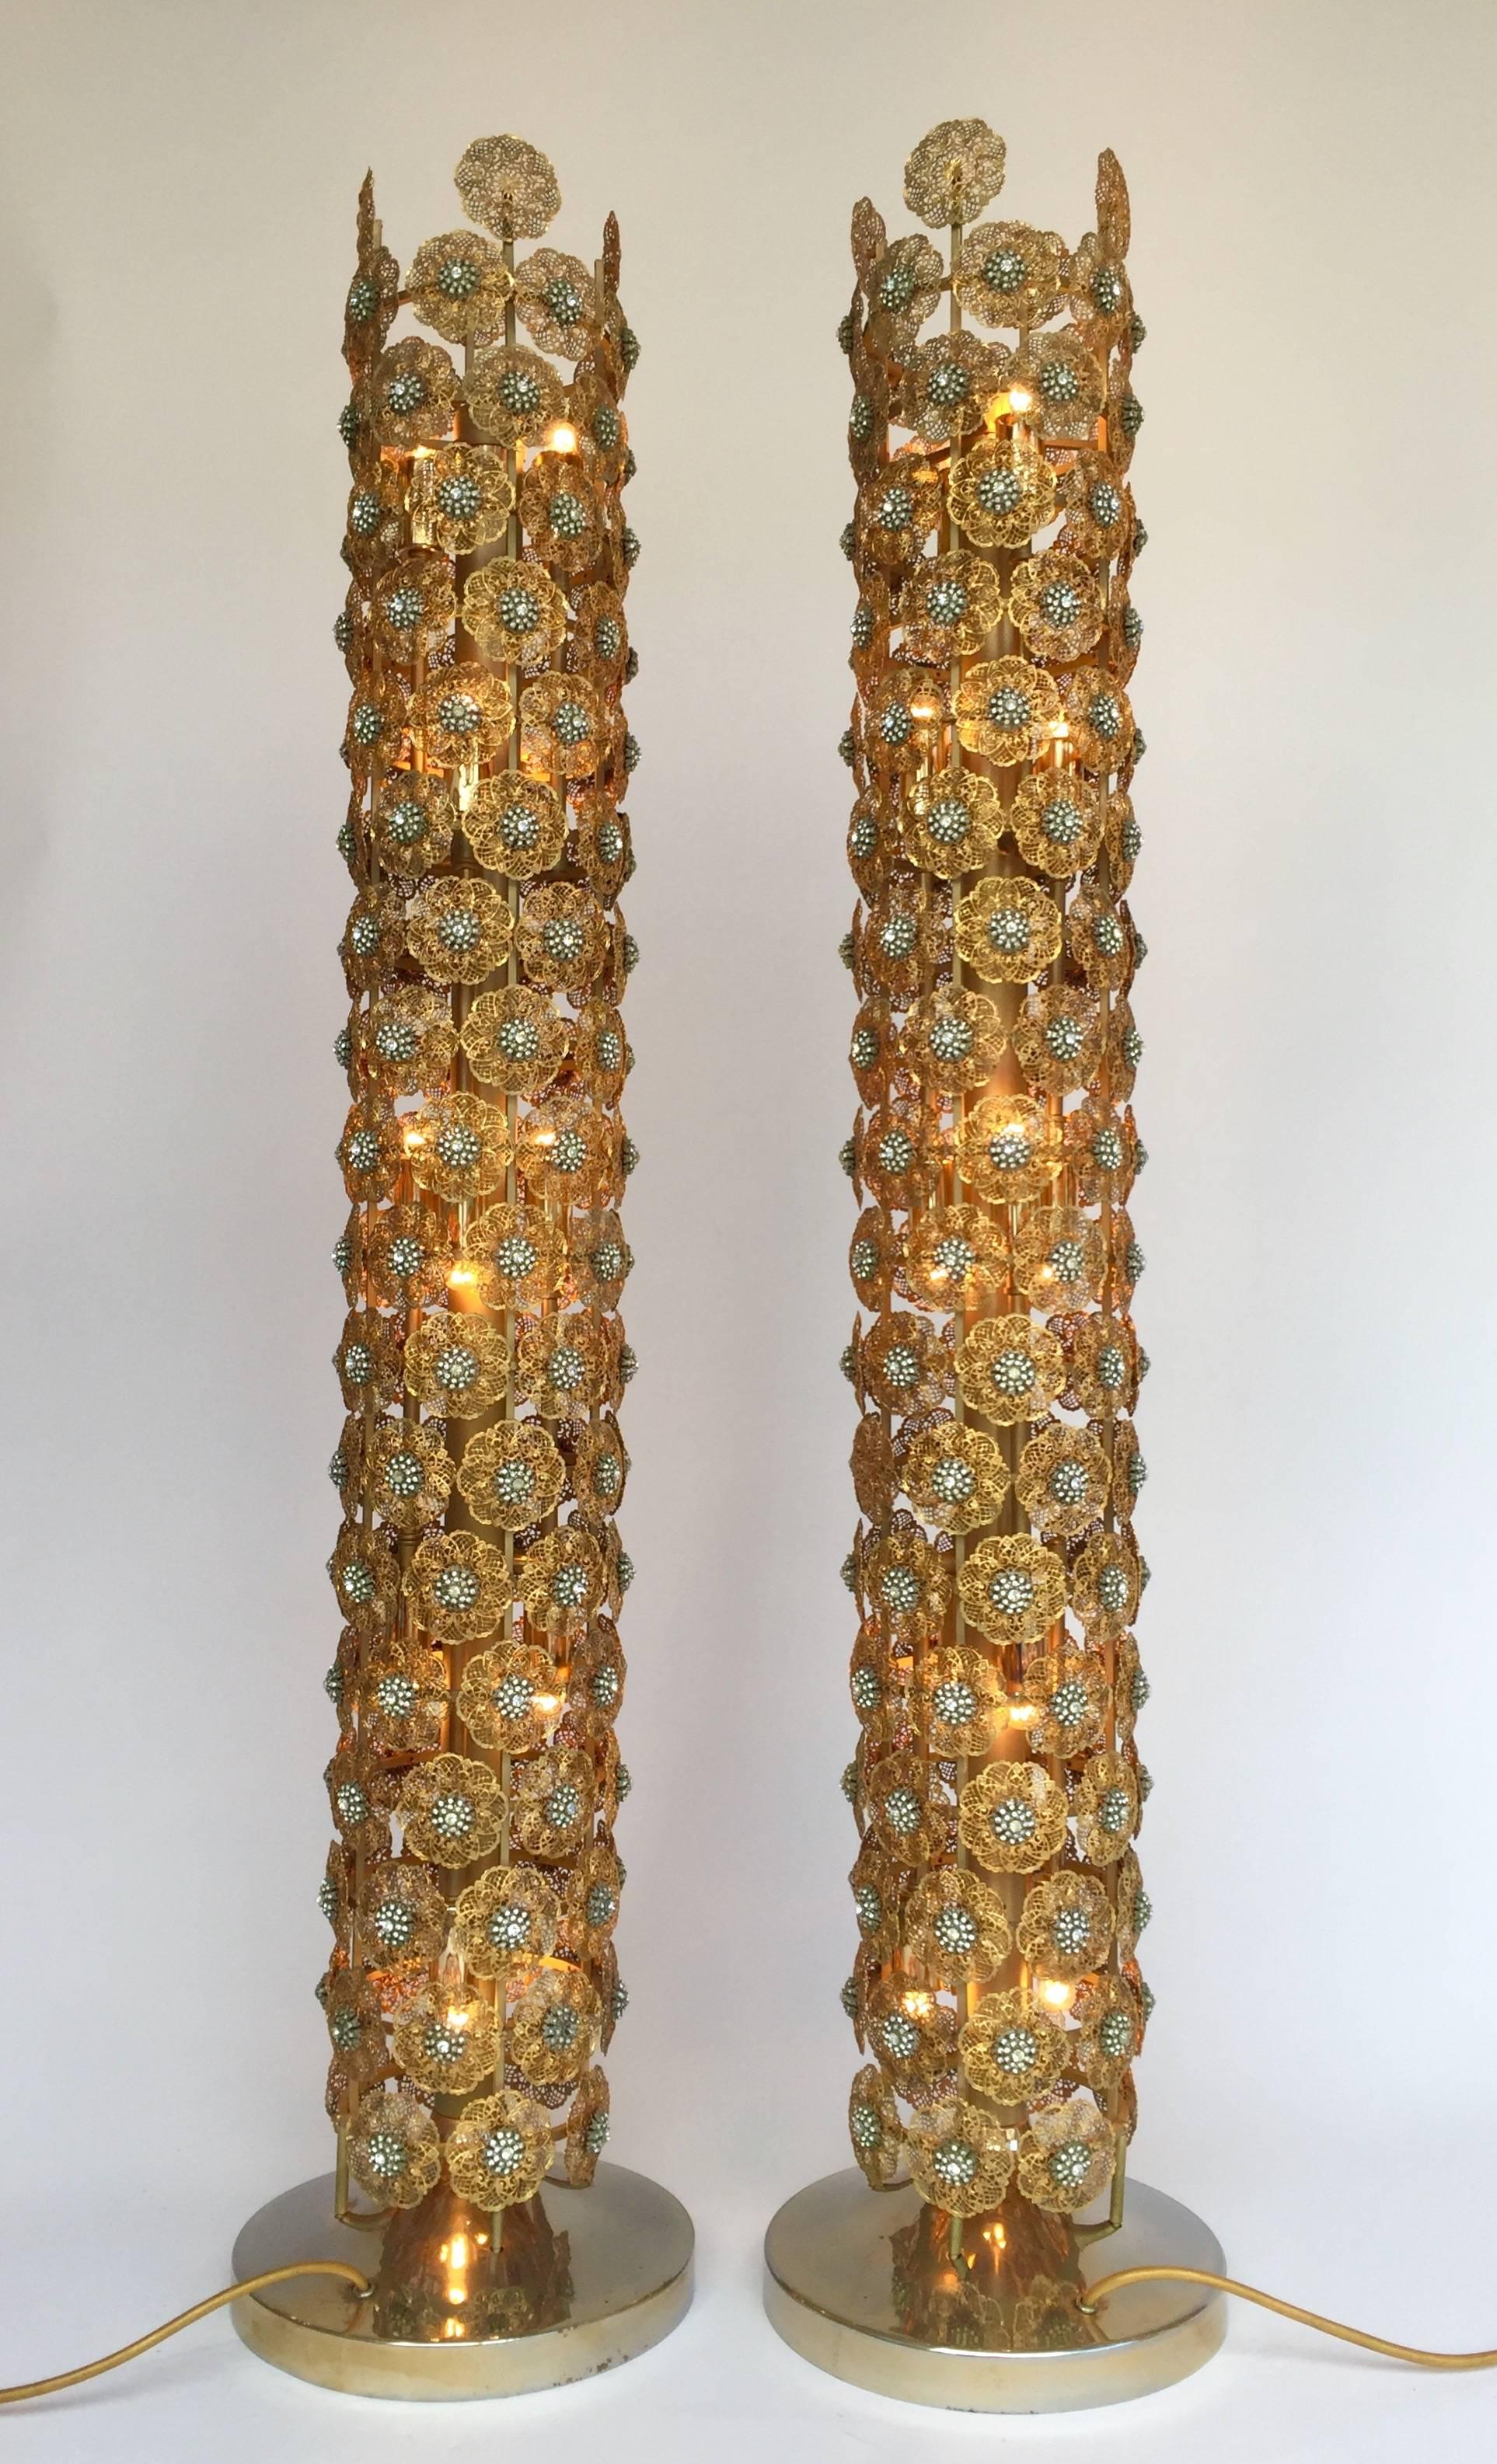 Very rare and unusual pair of column floor lamps by the crystal lightning editor Faustig Munich, Germany. A precious manufacturing of brass filigree with crystal. All elements are screwing mounted on brass structure. We can talk about floor lamps in